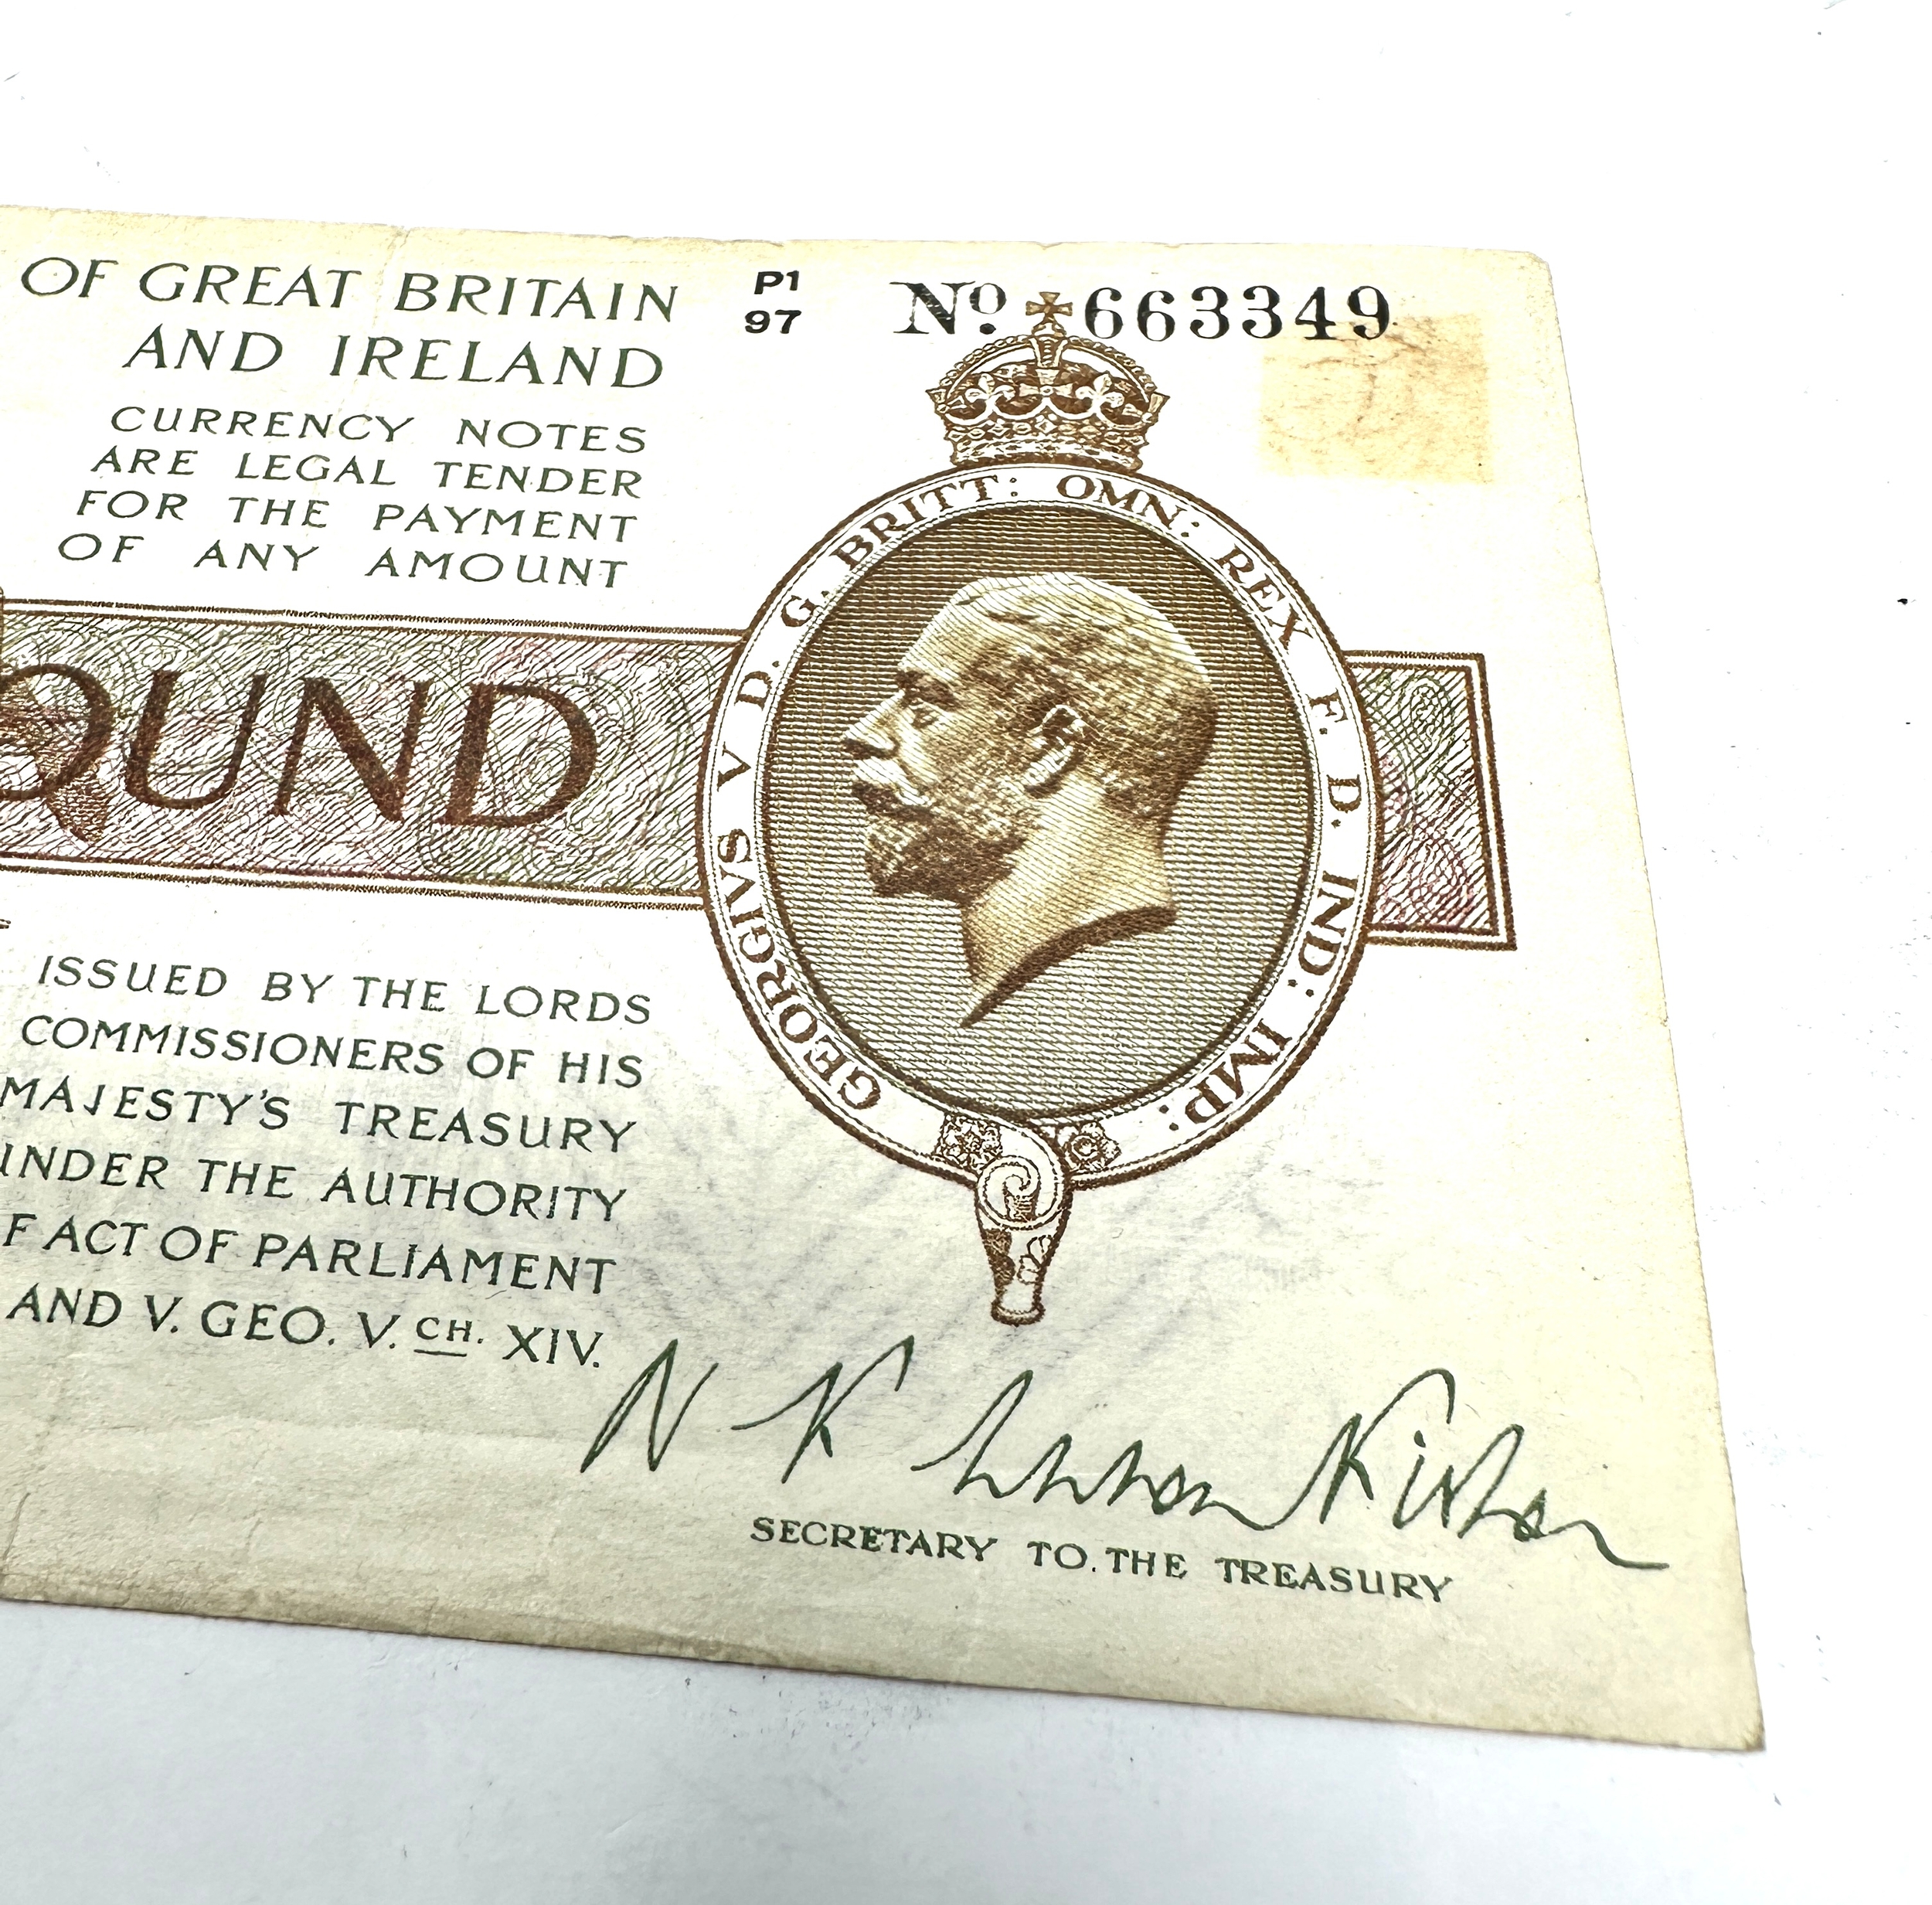 United Kingdom of Great Britain and Ireland one pound - Image 3 of 4